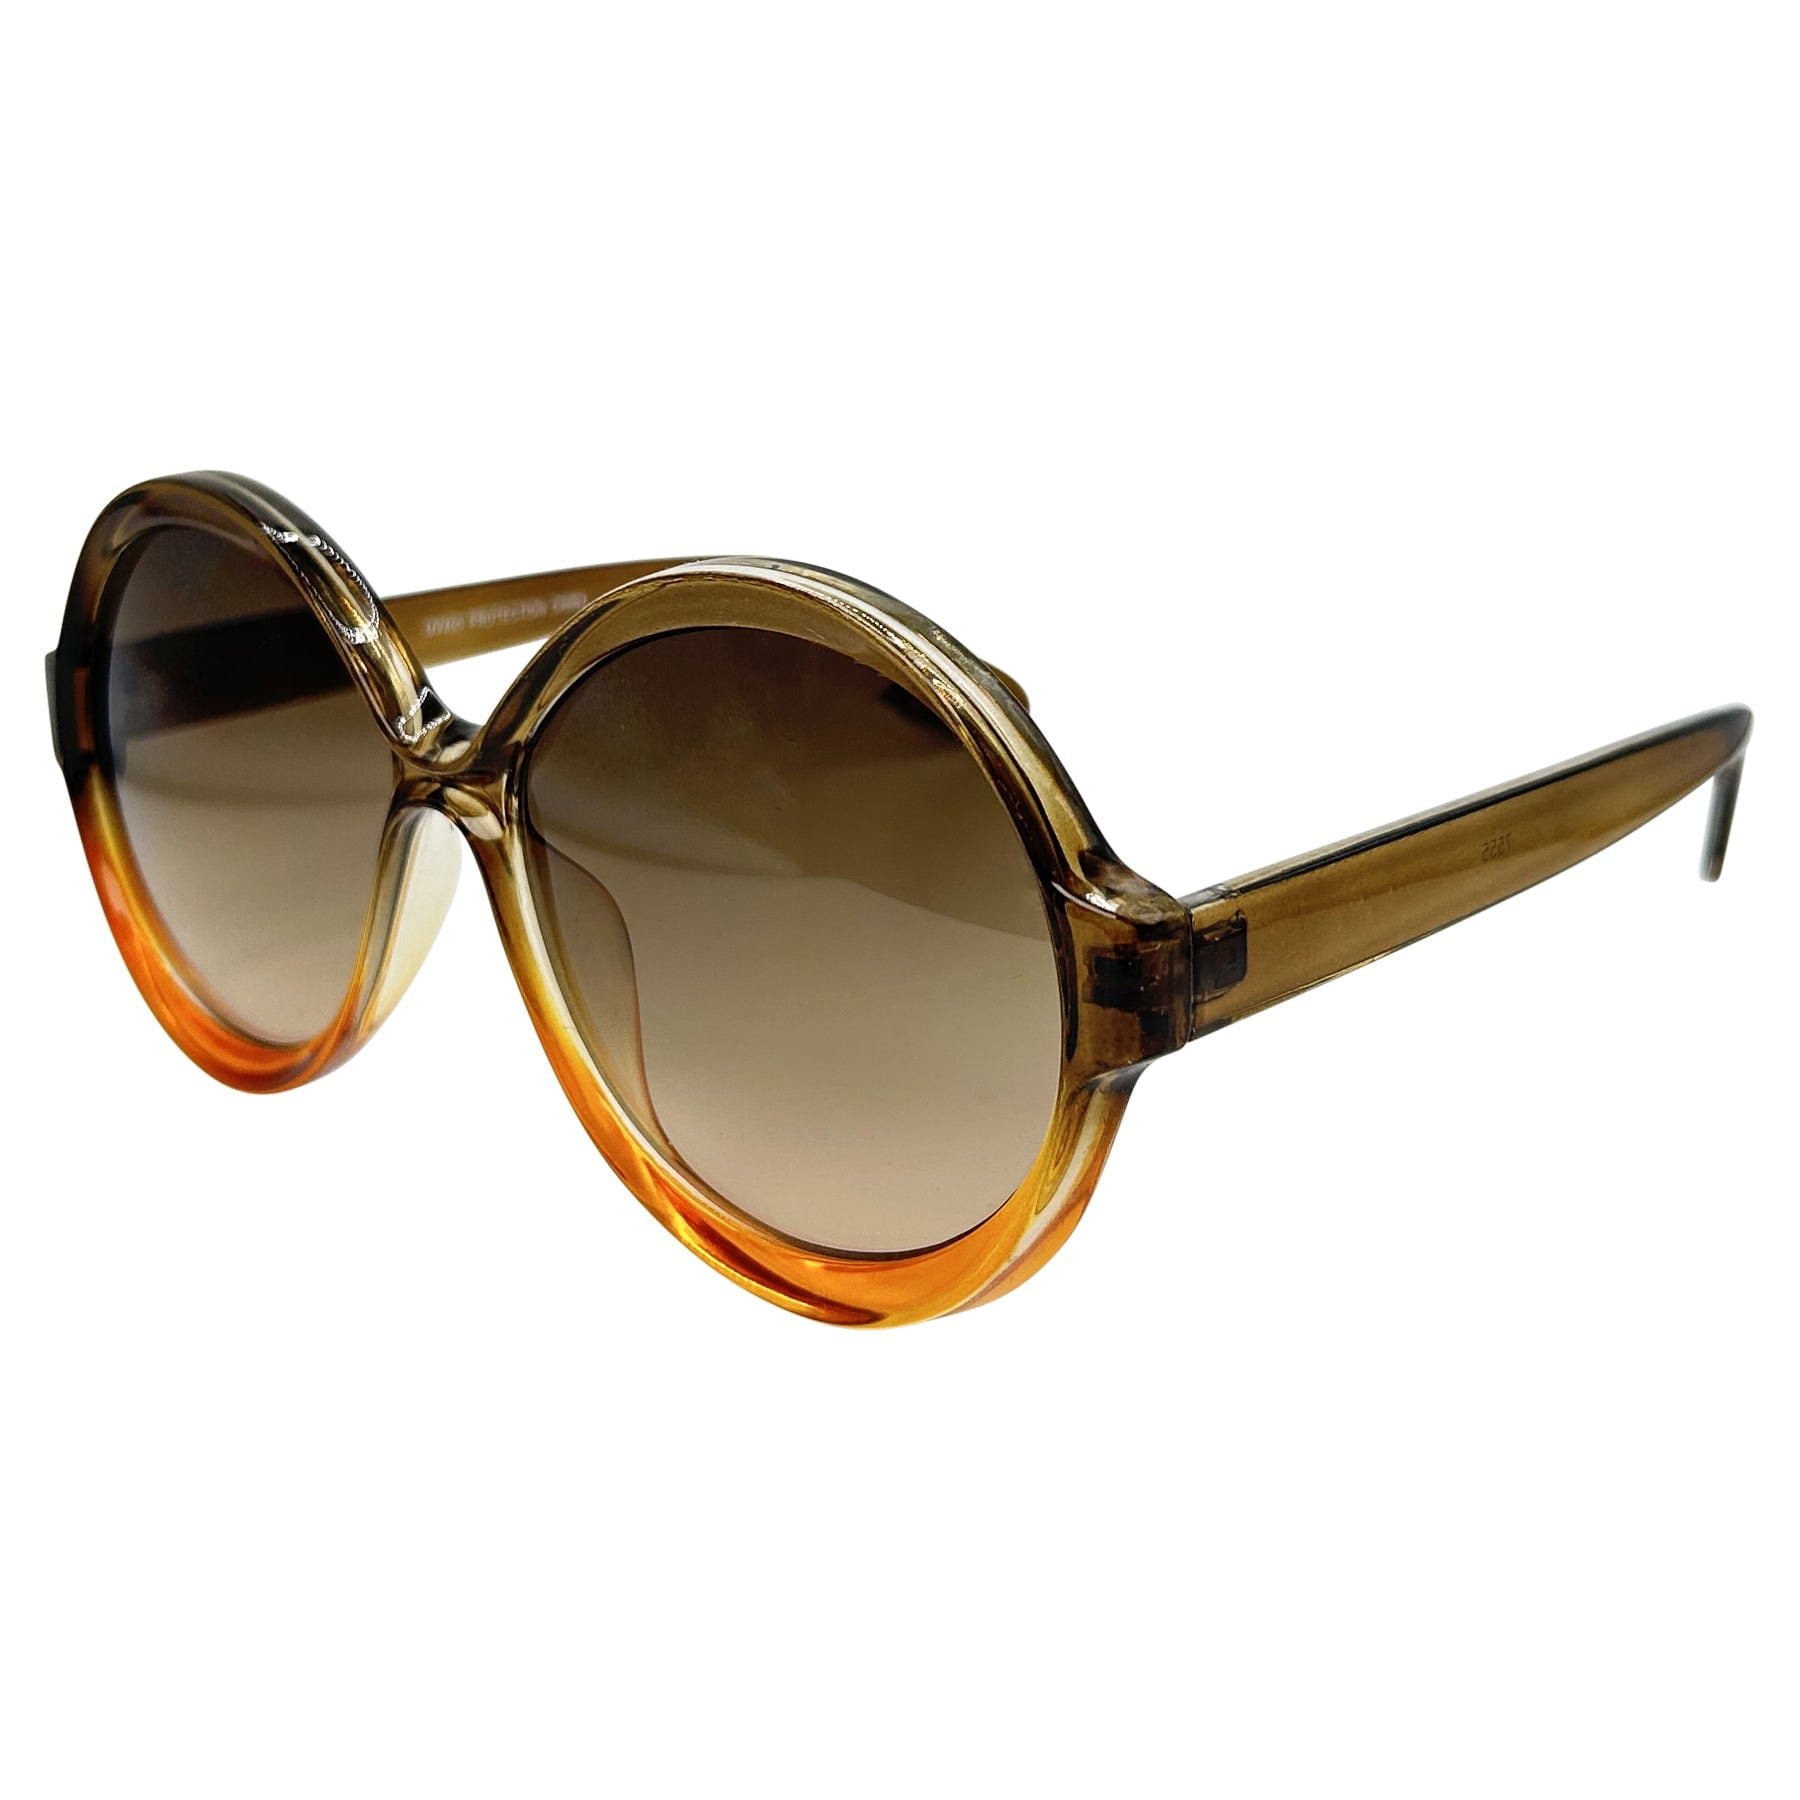 olive and orange ombre colored sunglasses with a oversized circle frame